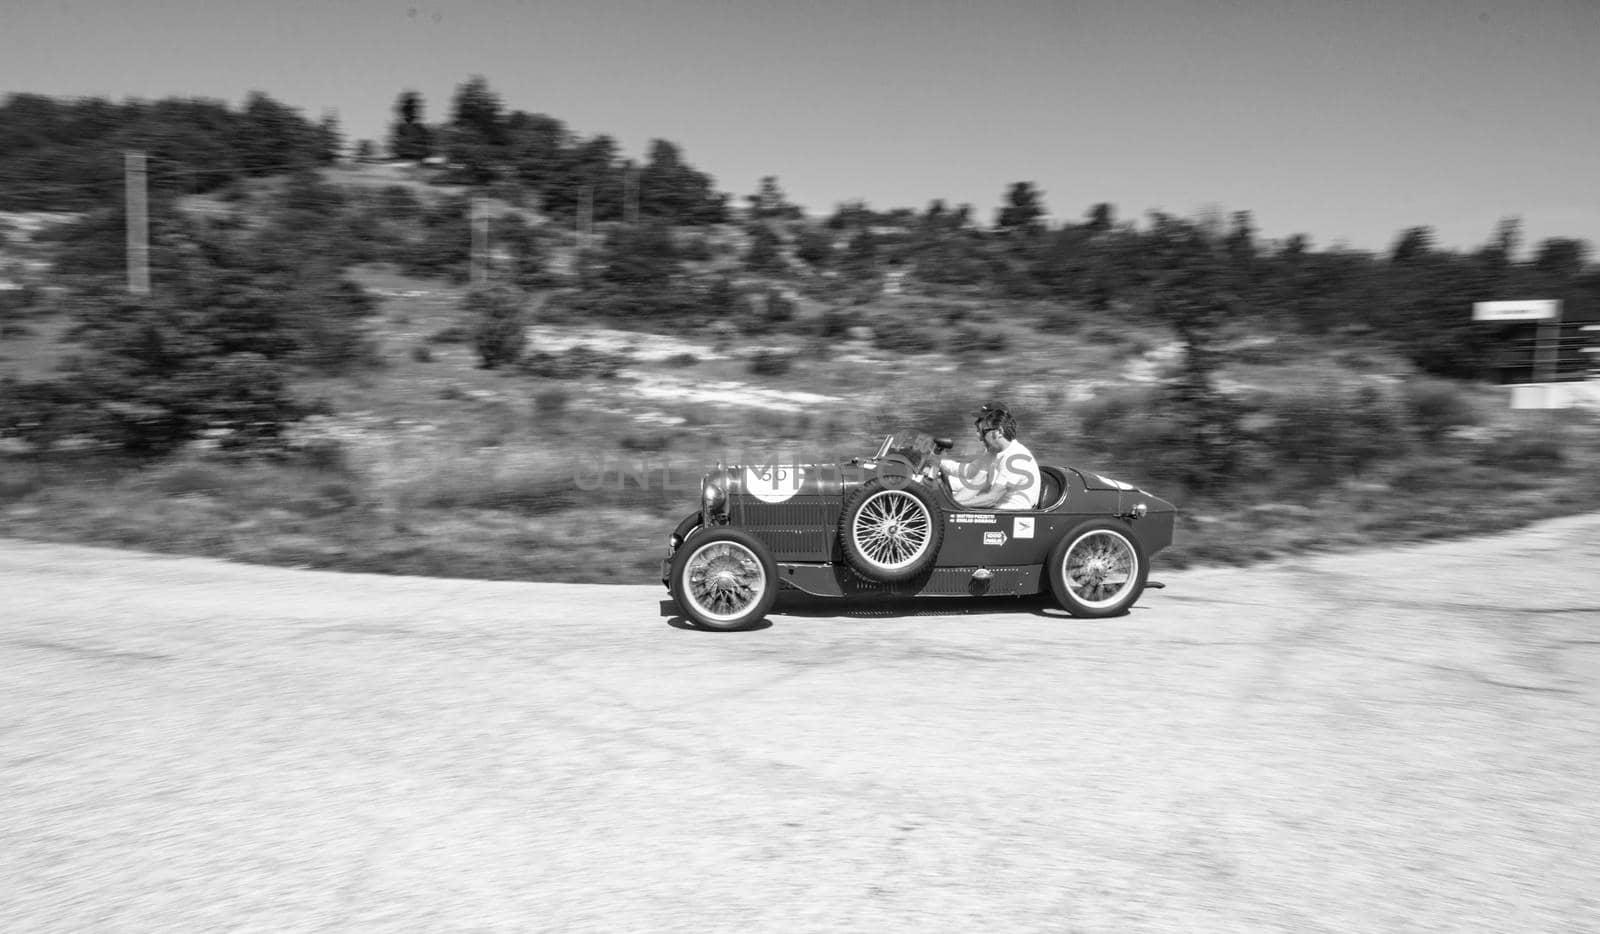 SALMSON GRAND SPORT GS9 1929 on an old racing car in rally Mille Miglia 2022 the famous italian historical race (1927-1957 by massimocampanari